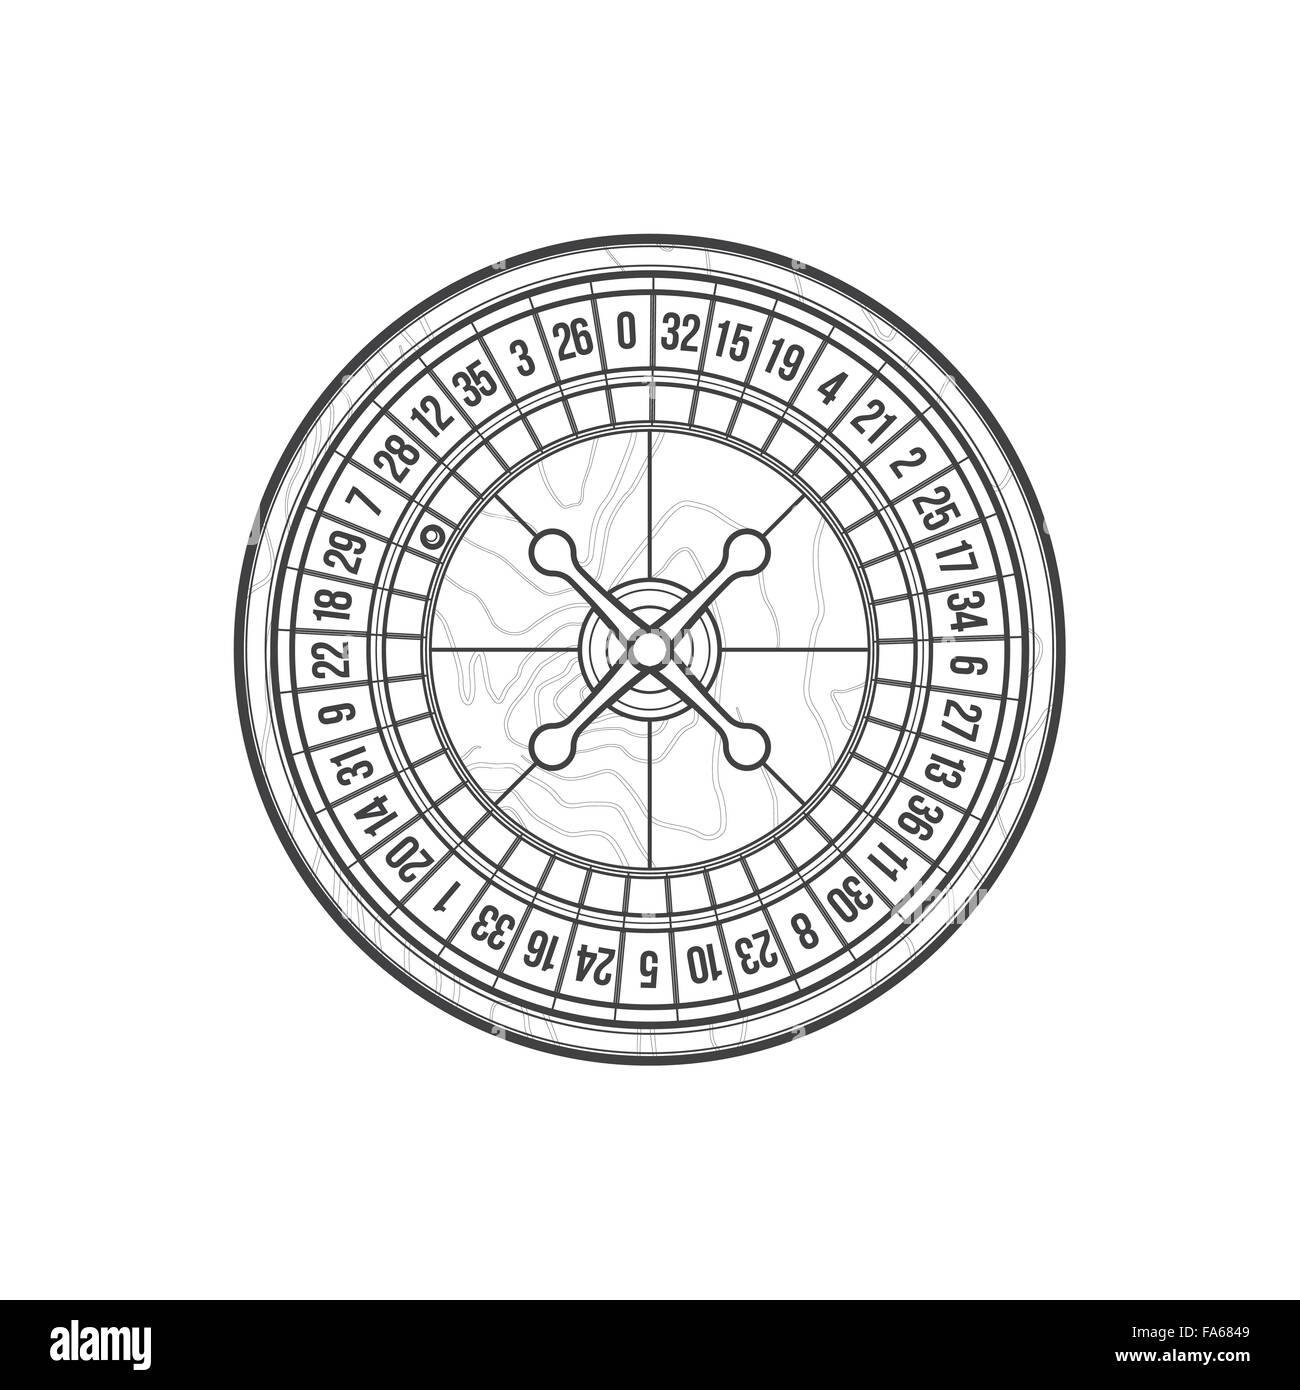 vector monochrome contour gambling casino wood textured roulette wheel isolated black outline illustration on white background Stock Vector